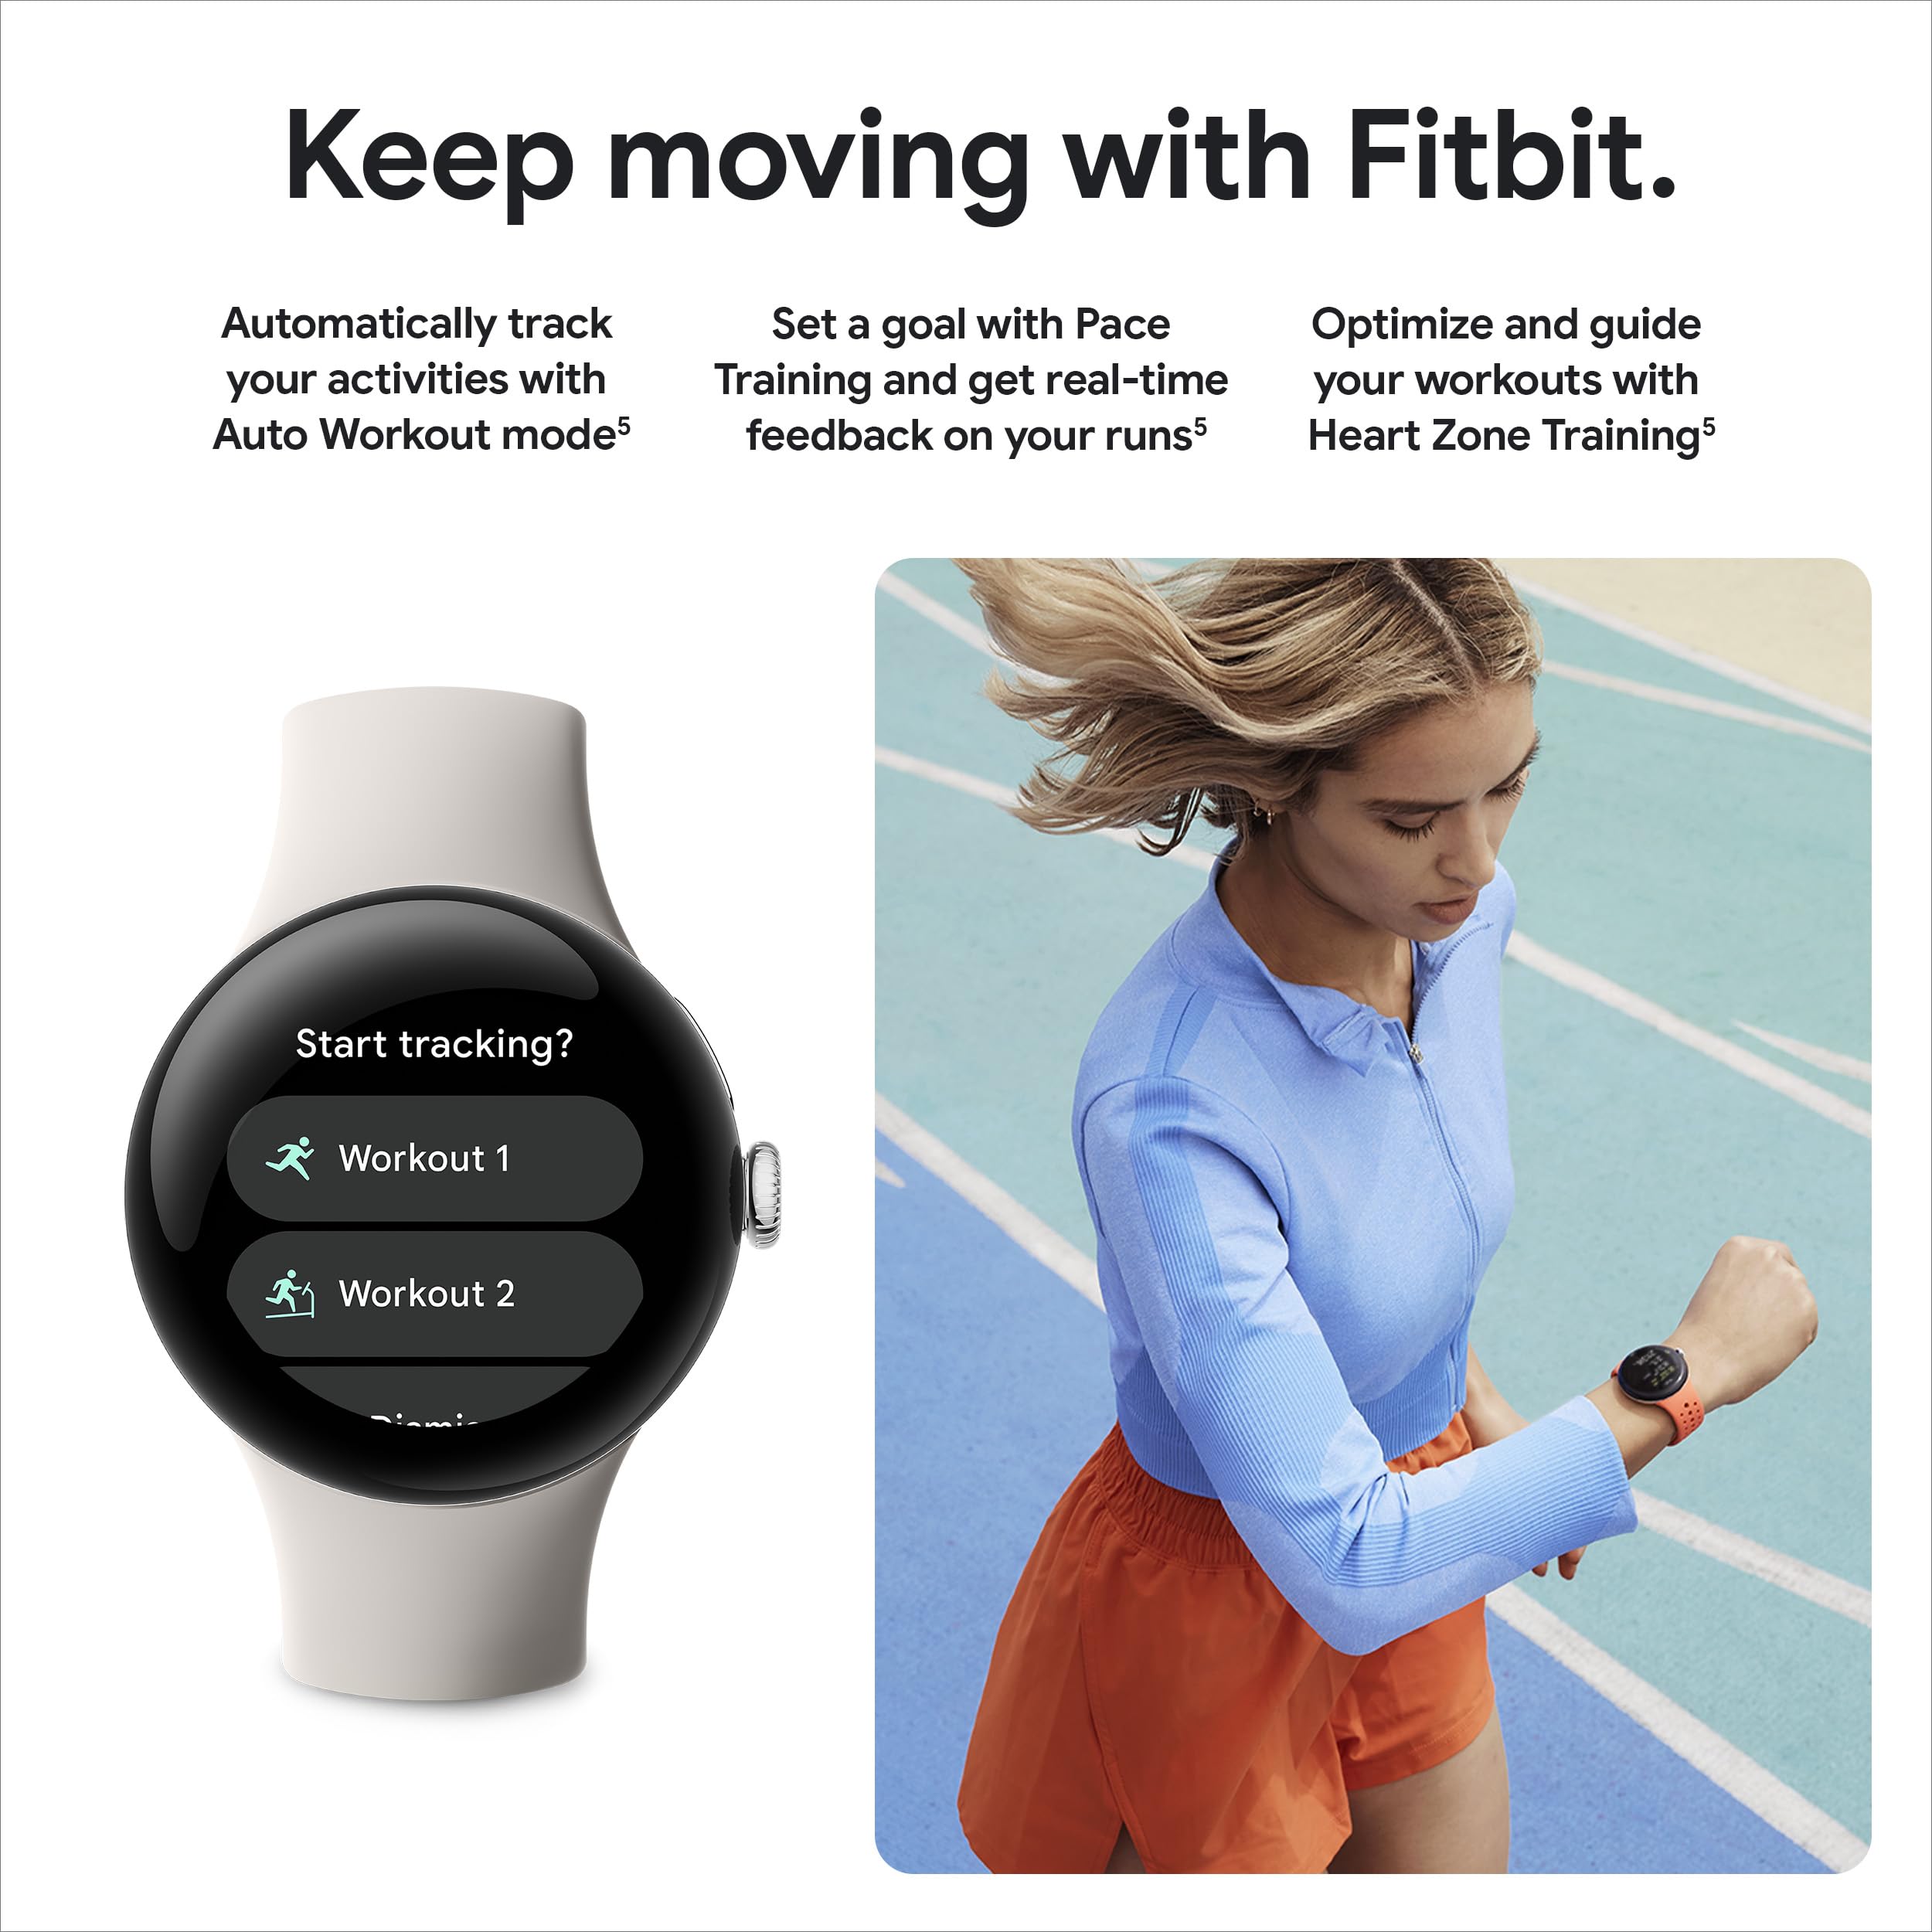 Google Pixel Watch 2 with the Best of Fitbit and Google - Heart Rate Tracking, Stress Management, Safety Features - Android Smartwatch - Polished Silver Aluminum Case - Bay Active Band - Wi-Fi